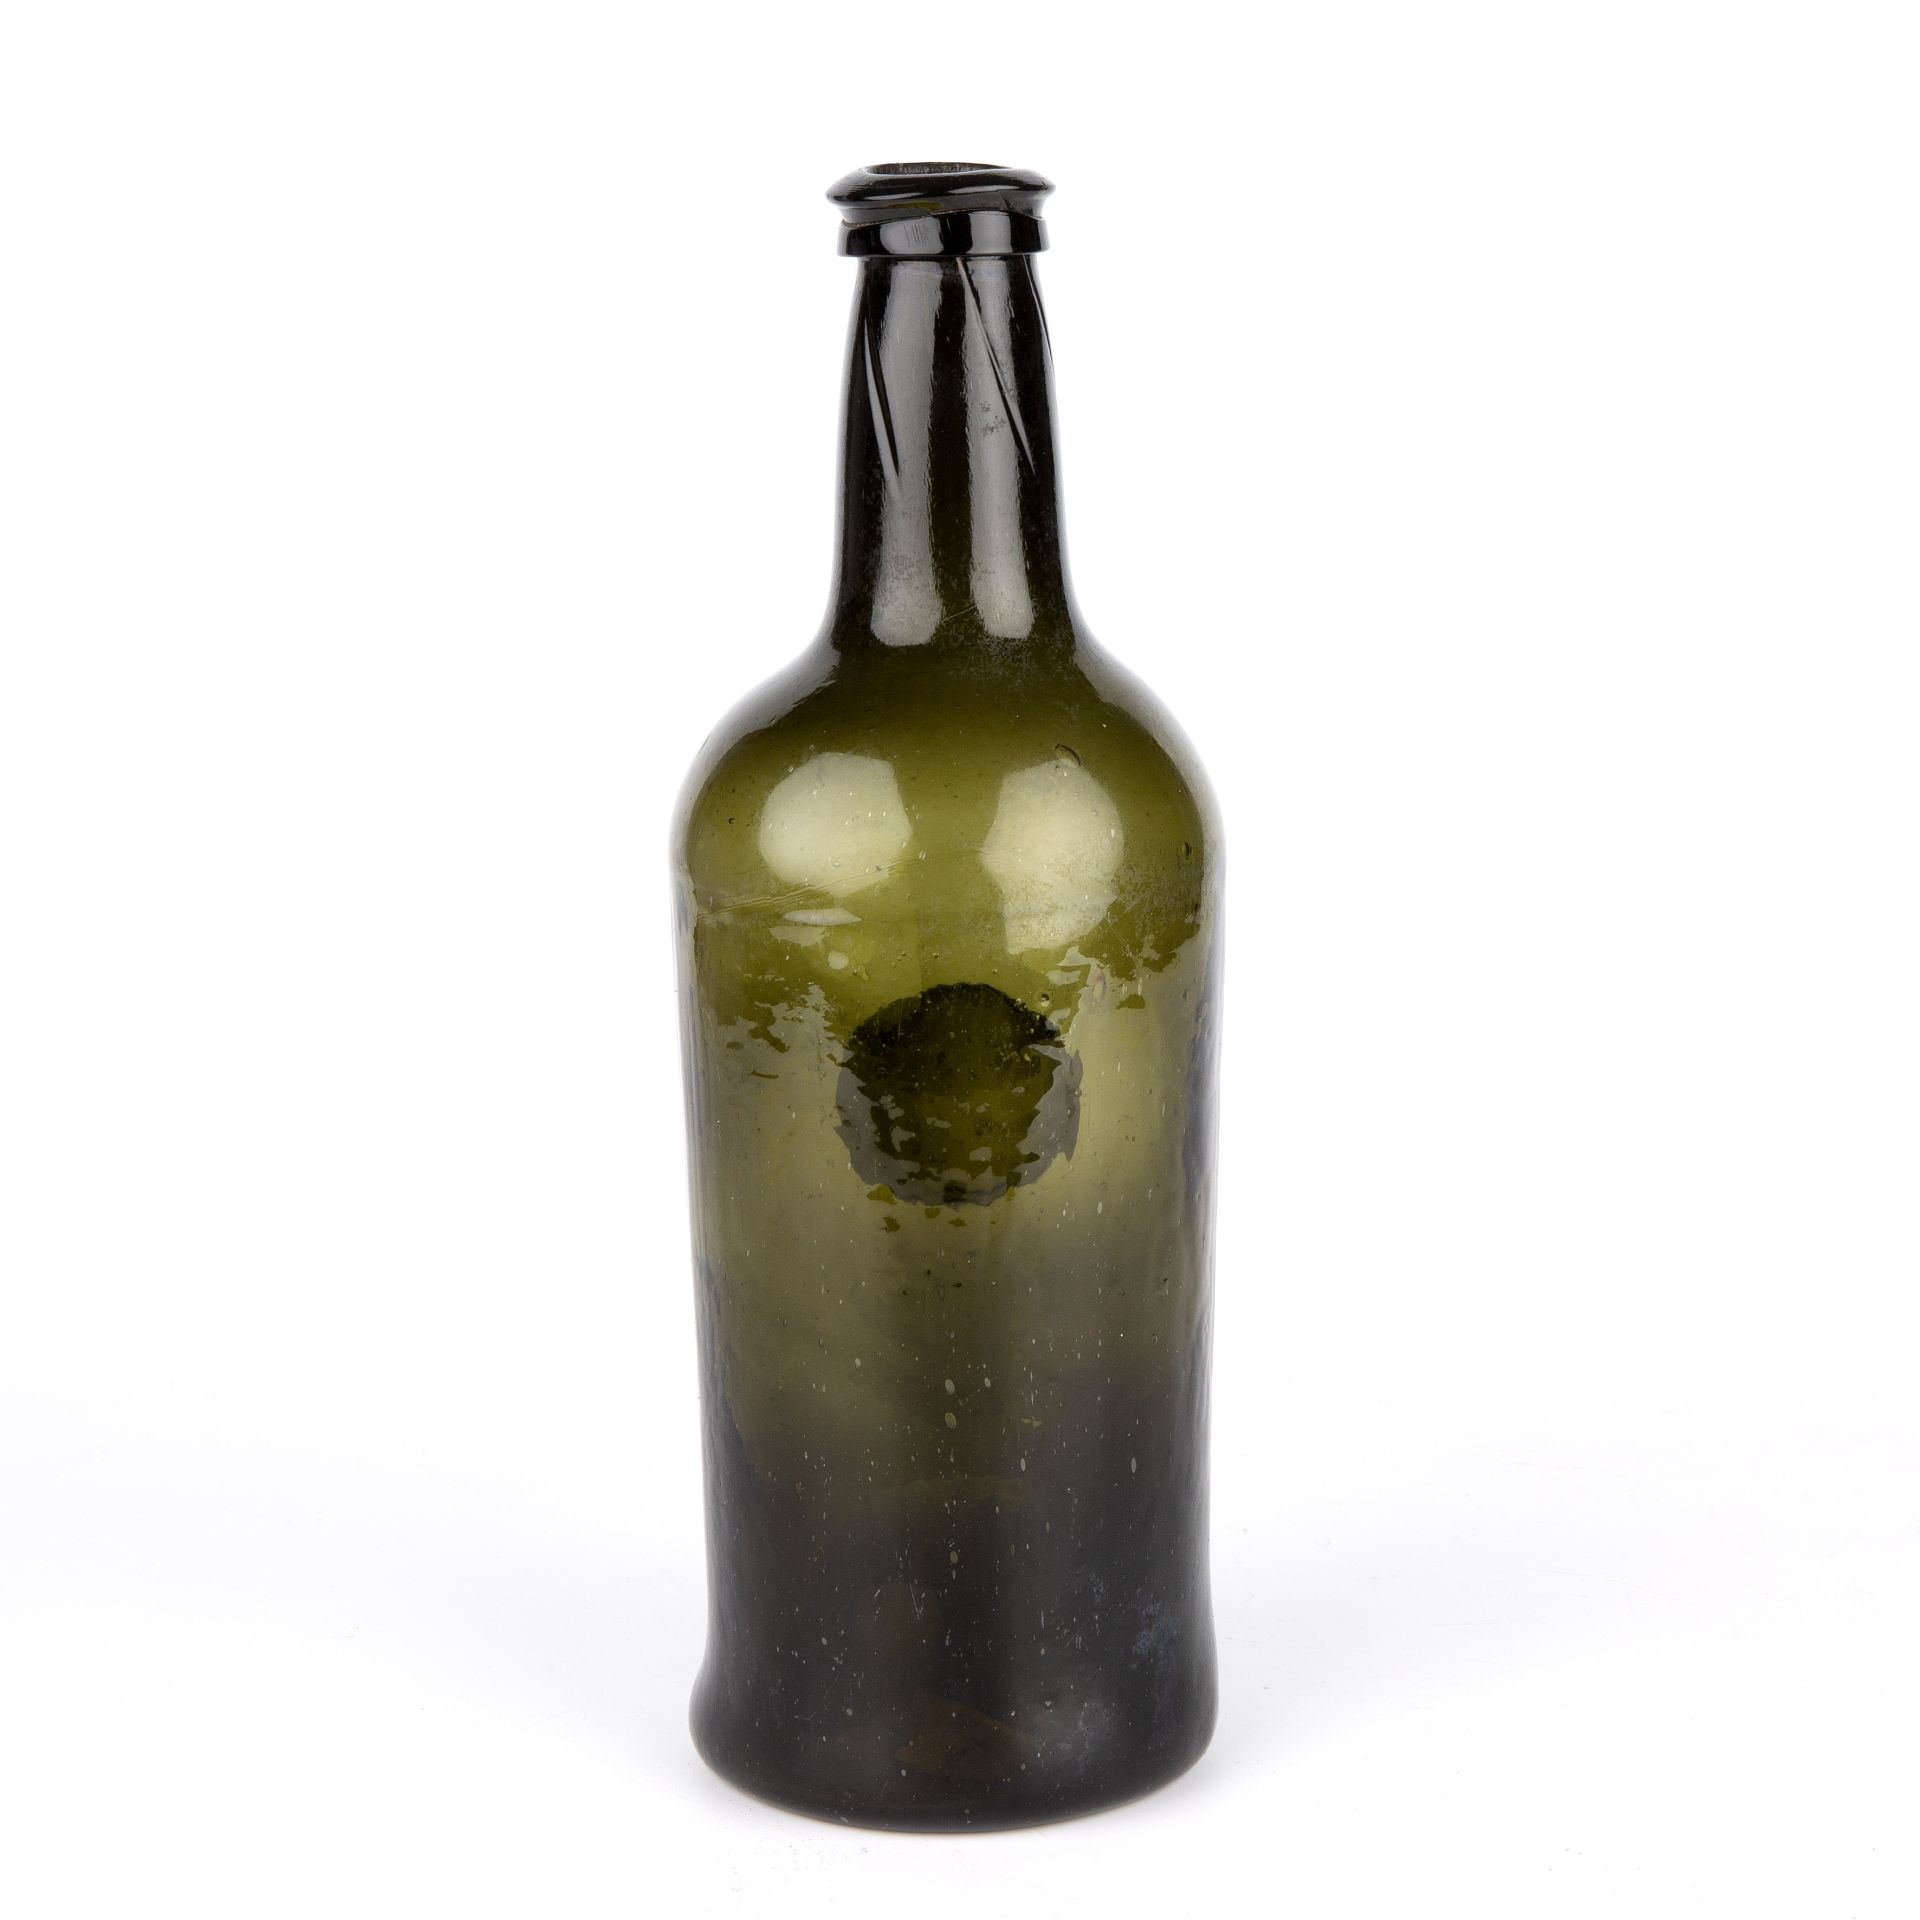 An 18th century Magdalen college green glass bottle, with a seal marked Mag.Col C.R circa 1770-80, - Image 2 of 3